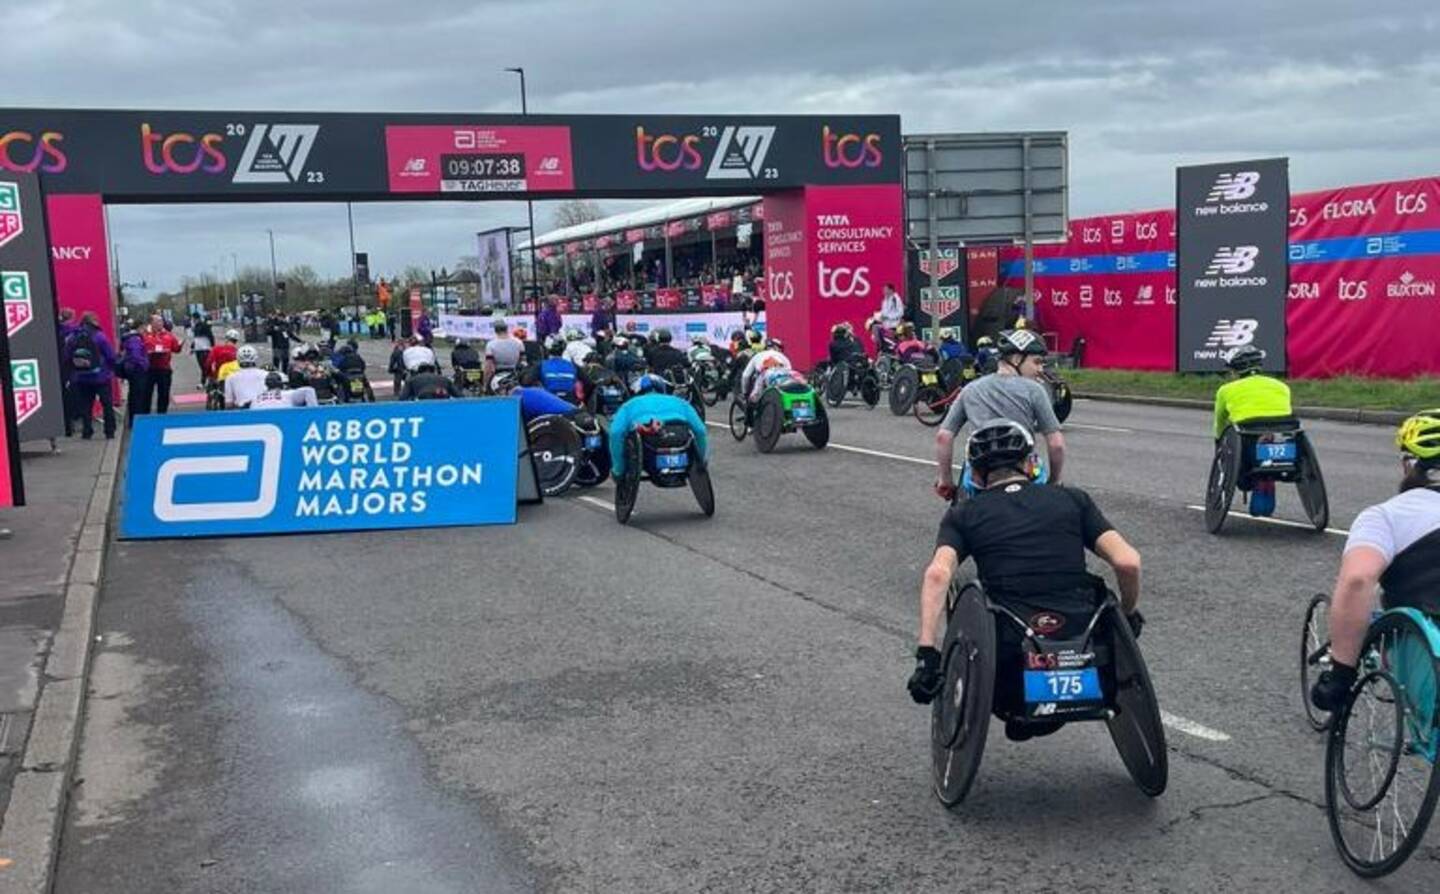 Wheelchair racers move away from the start line of the London Marathon.